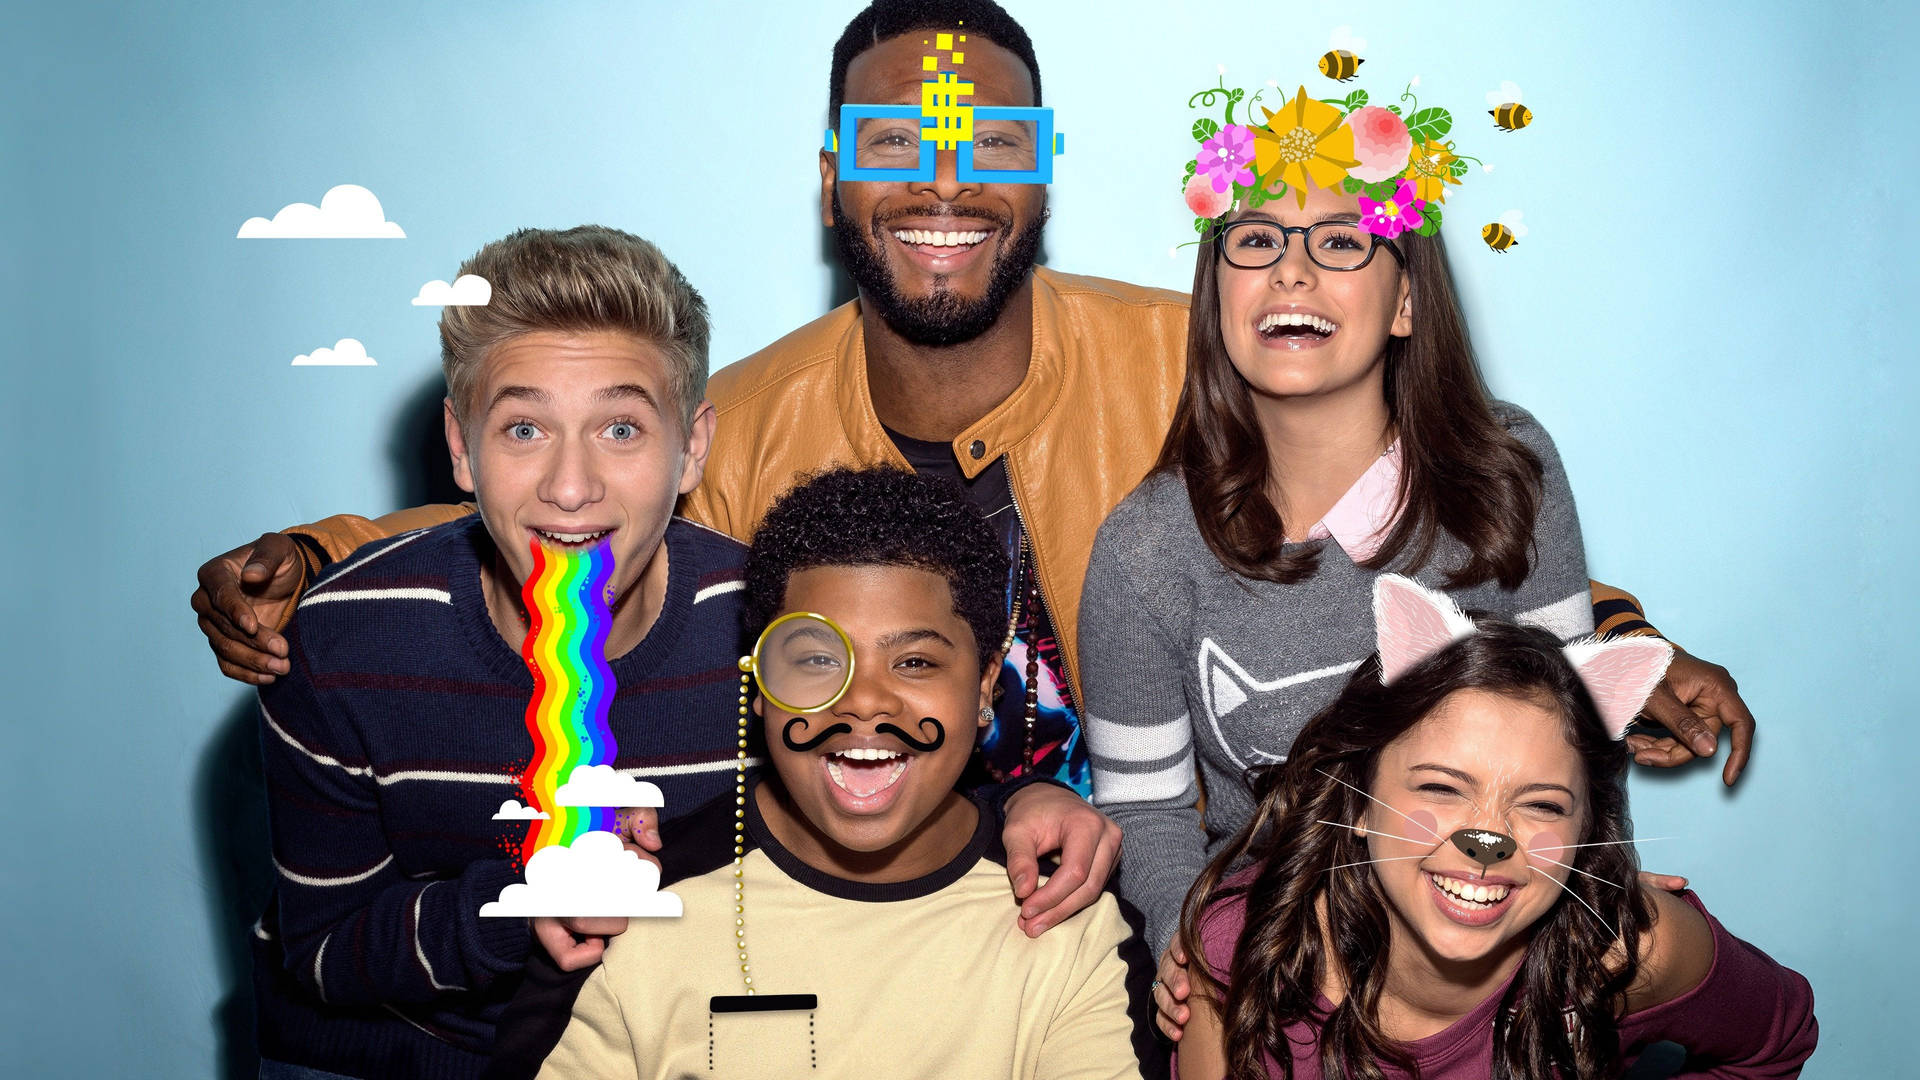 Game Shakers With Funny Filter Effects Wallpaper